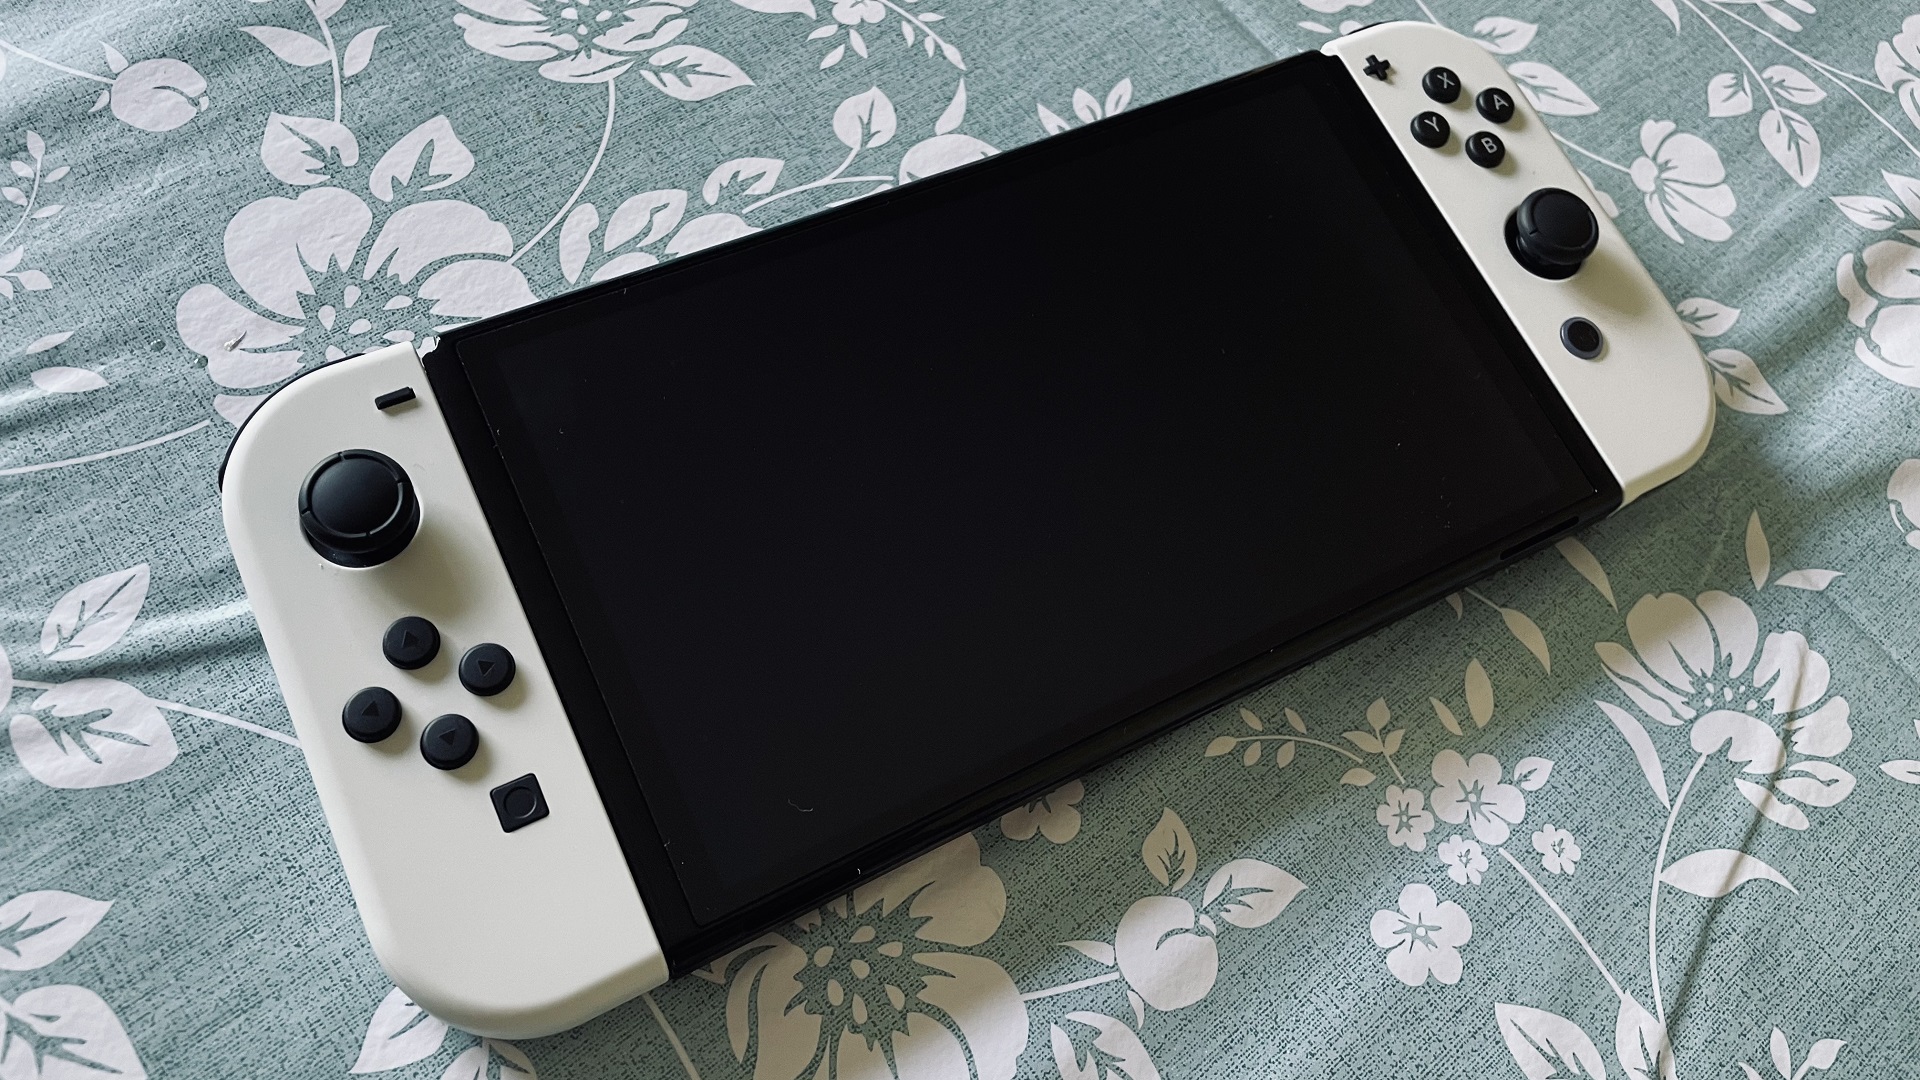 Nintendo Switch - OLED Model Review: Games Have Never Looked Better